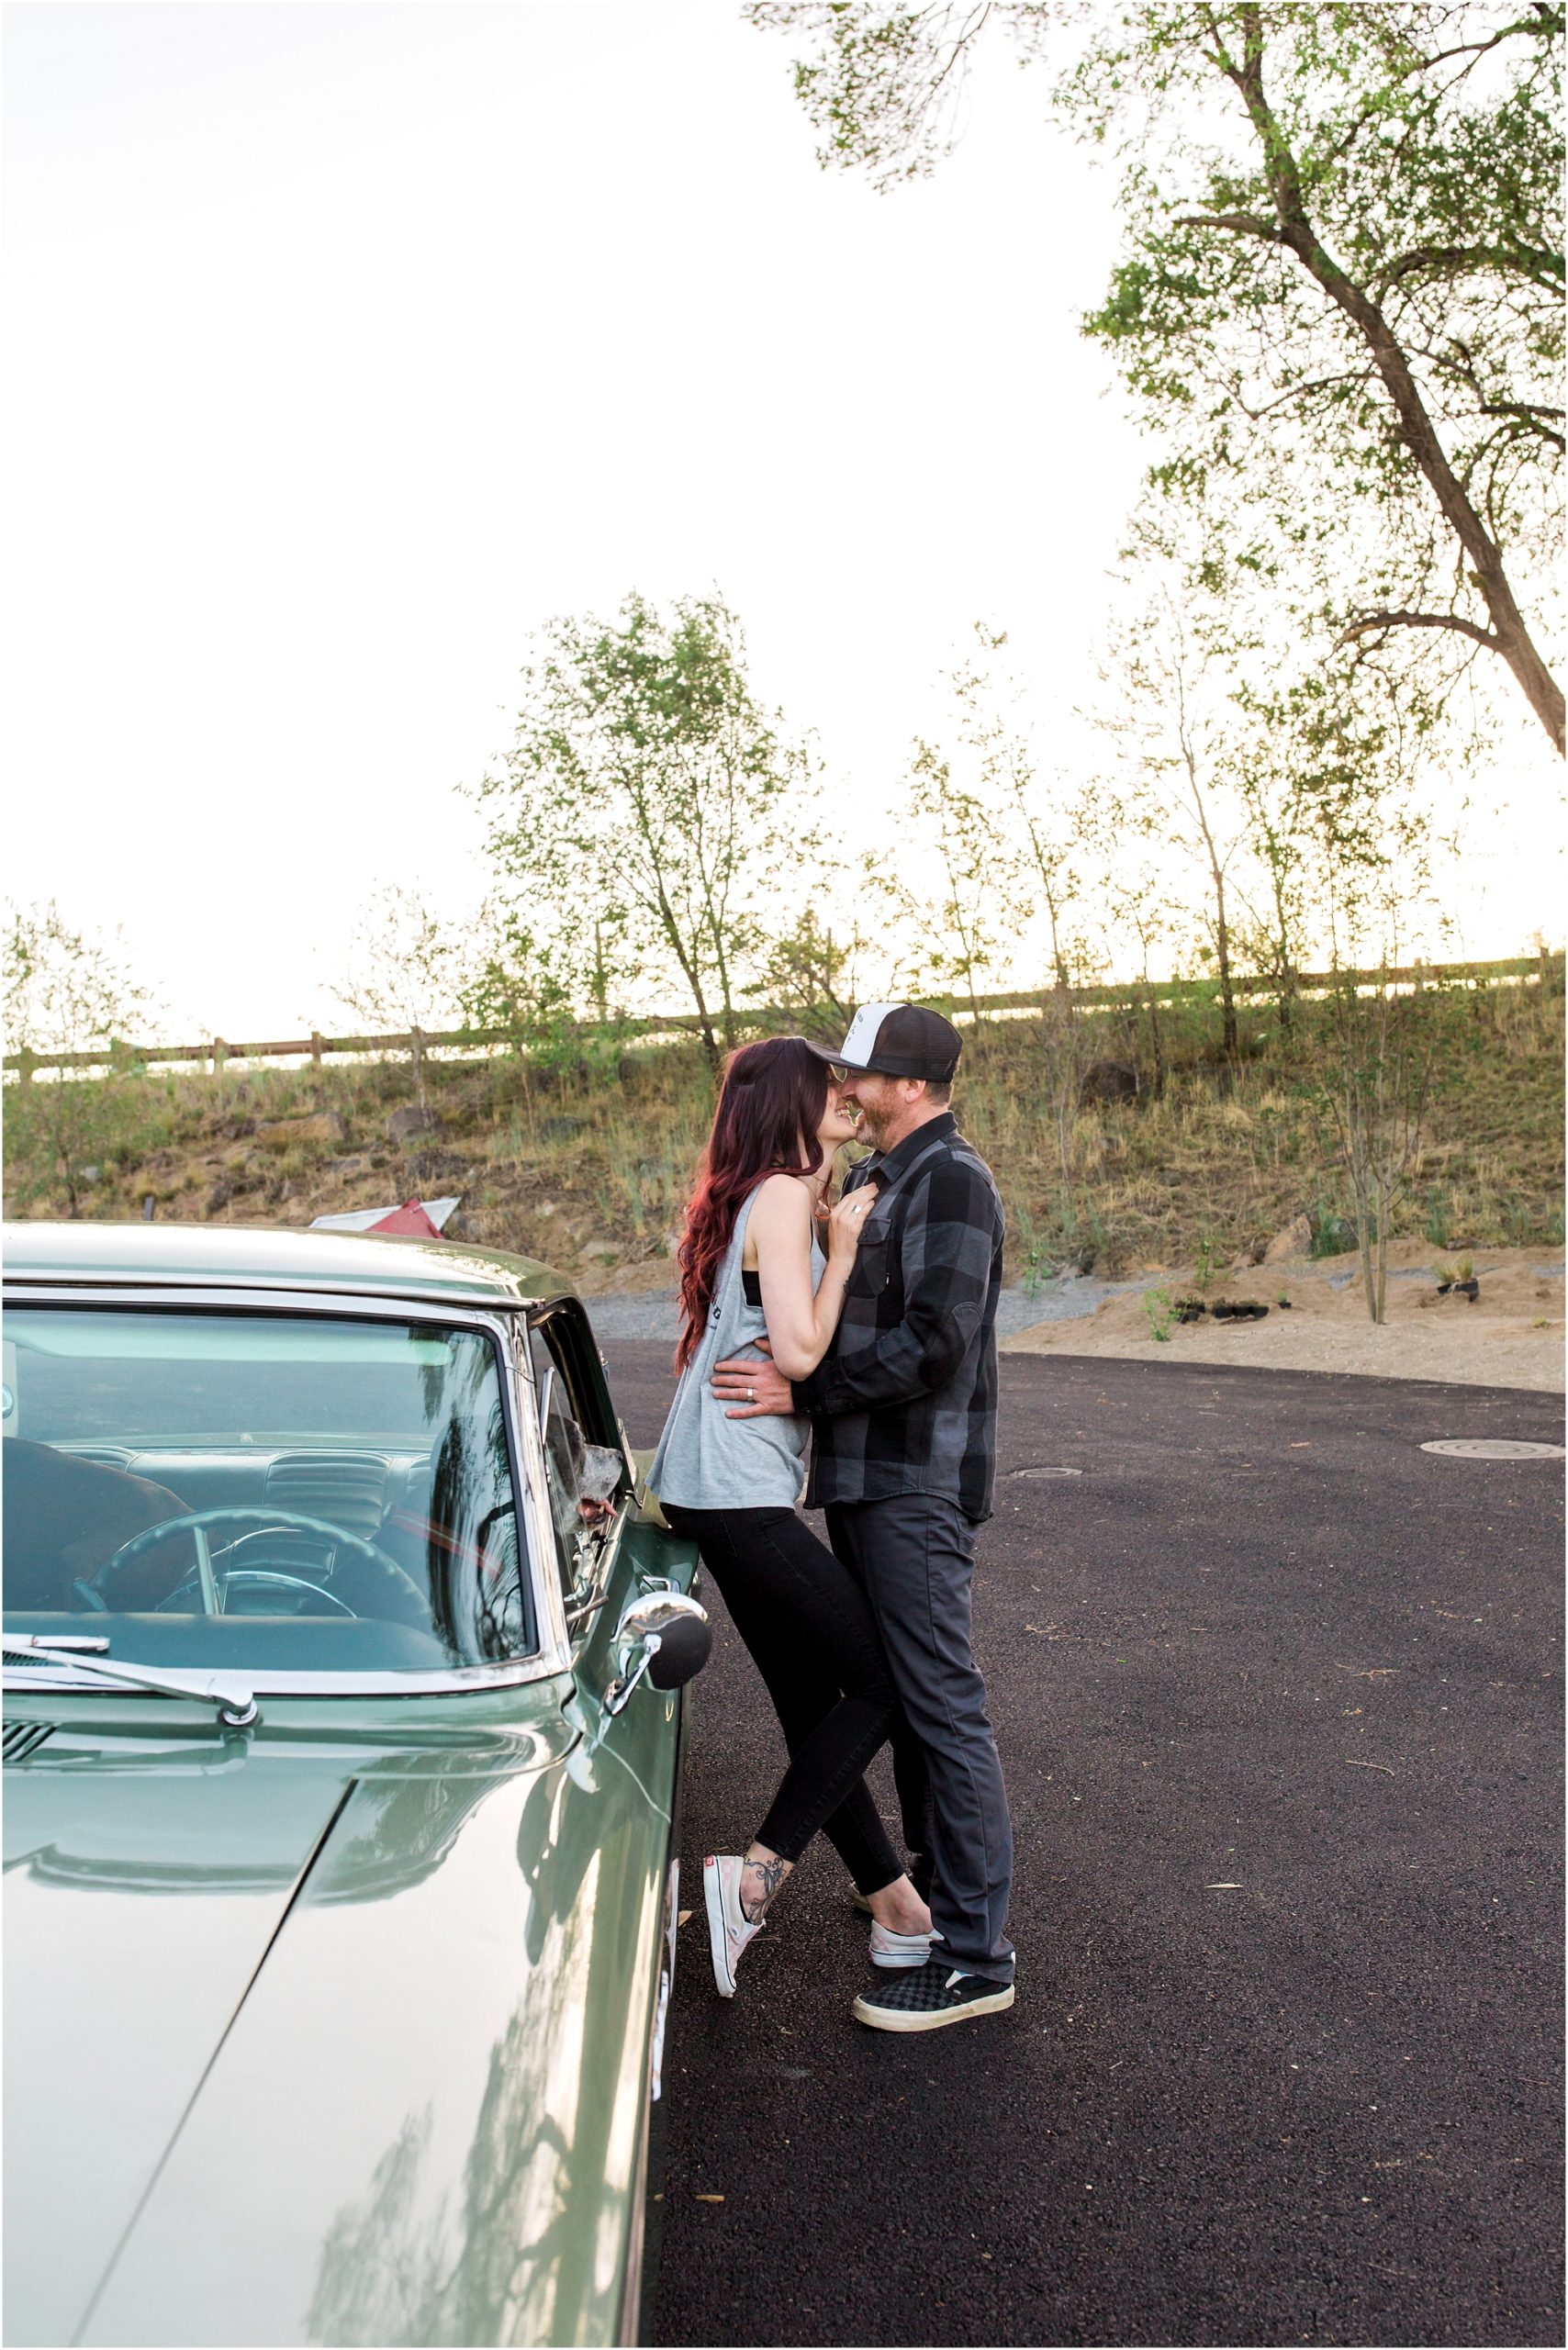 A classic car for this couple's engagement photo shoot in Bend, OR. | Erica Swantek Photography